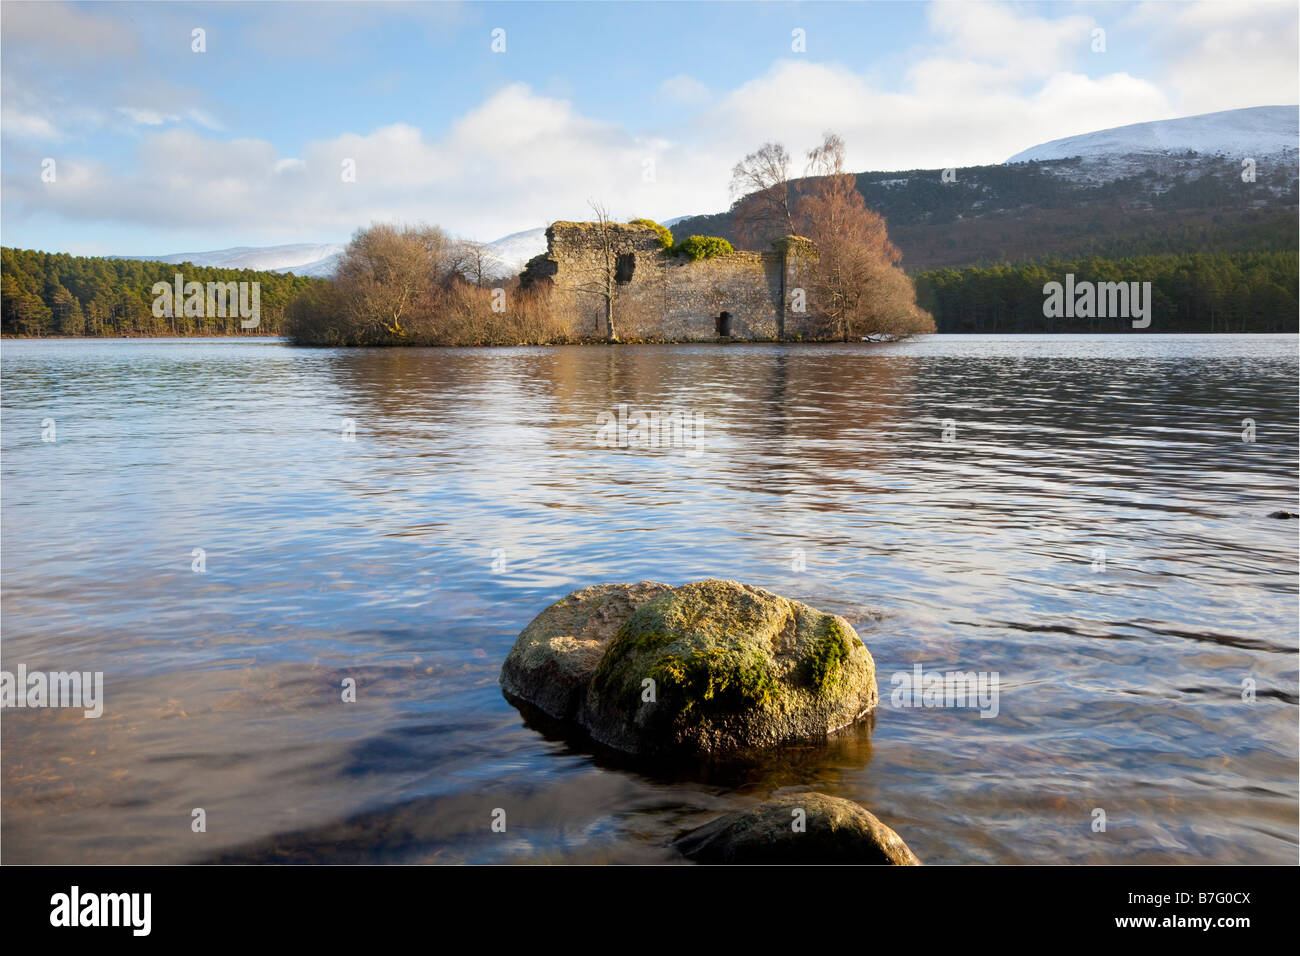 Lochside ruined historic 13th century island castle, forest and hill at freshwater Loch an Eilein, Craig Dubh, Rothiemurchus, Aviemore, Scotland, UK Stock Photo